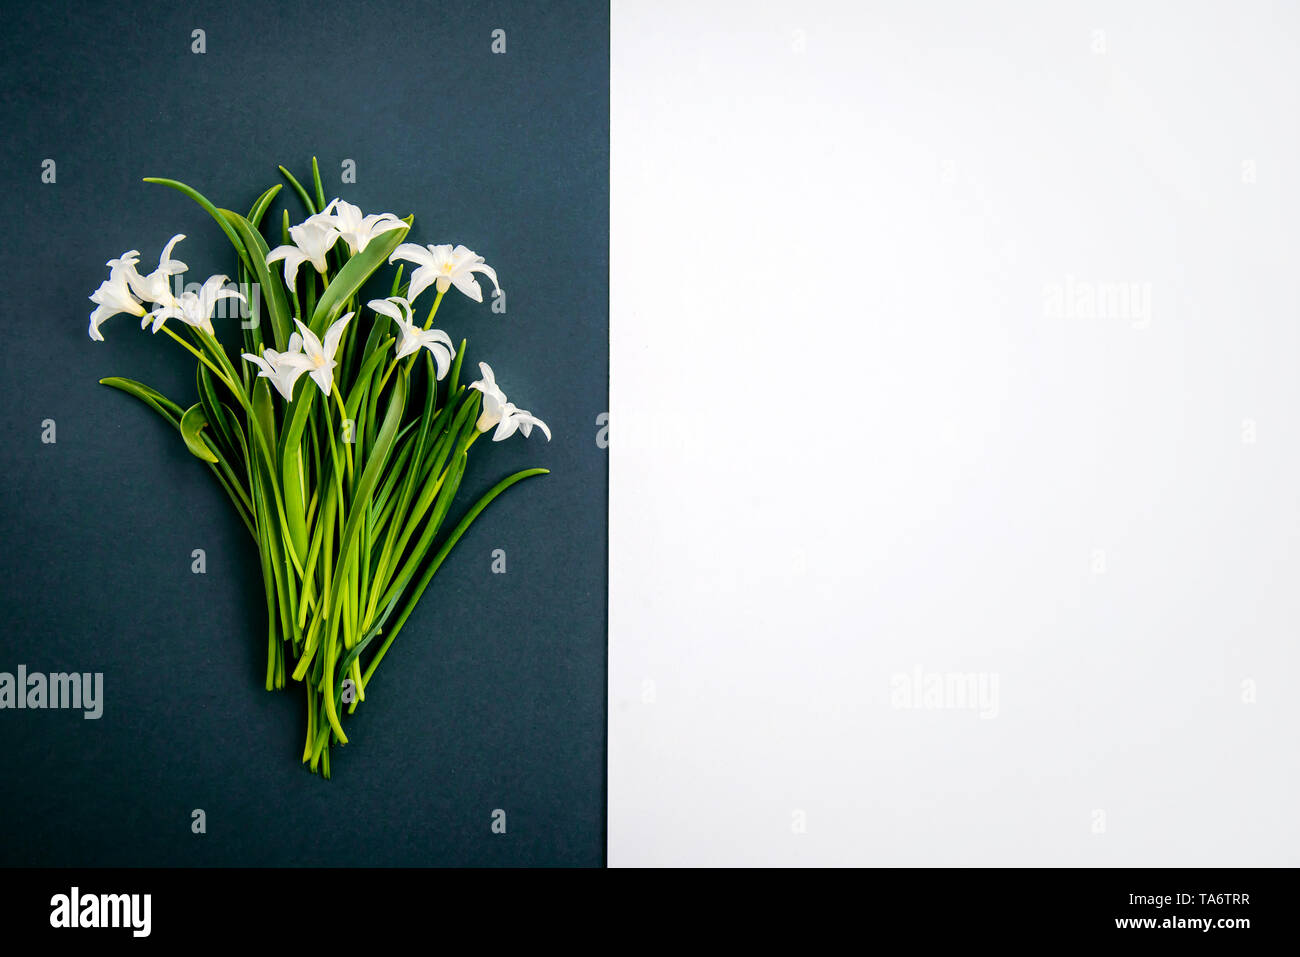 Small white spring flowers Chionodoxa on a dark green background with copy space Stock Photo